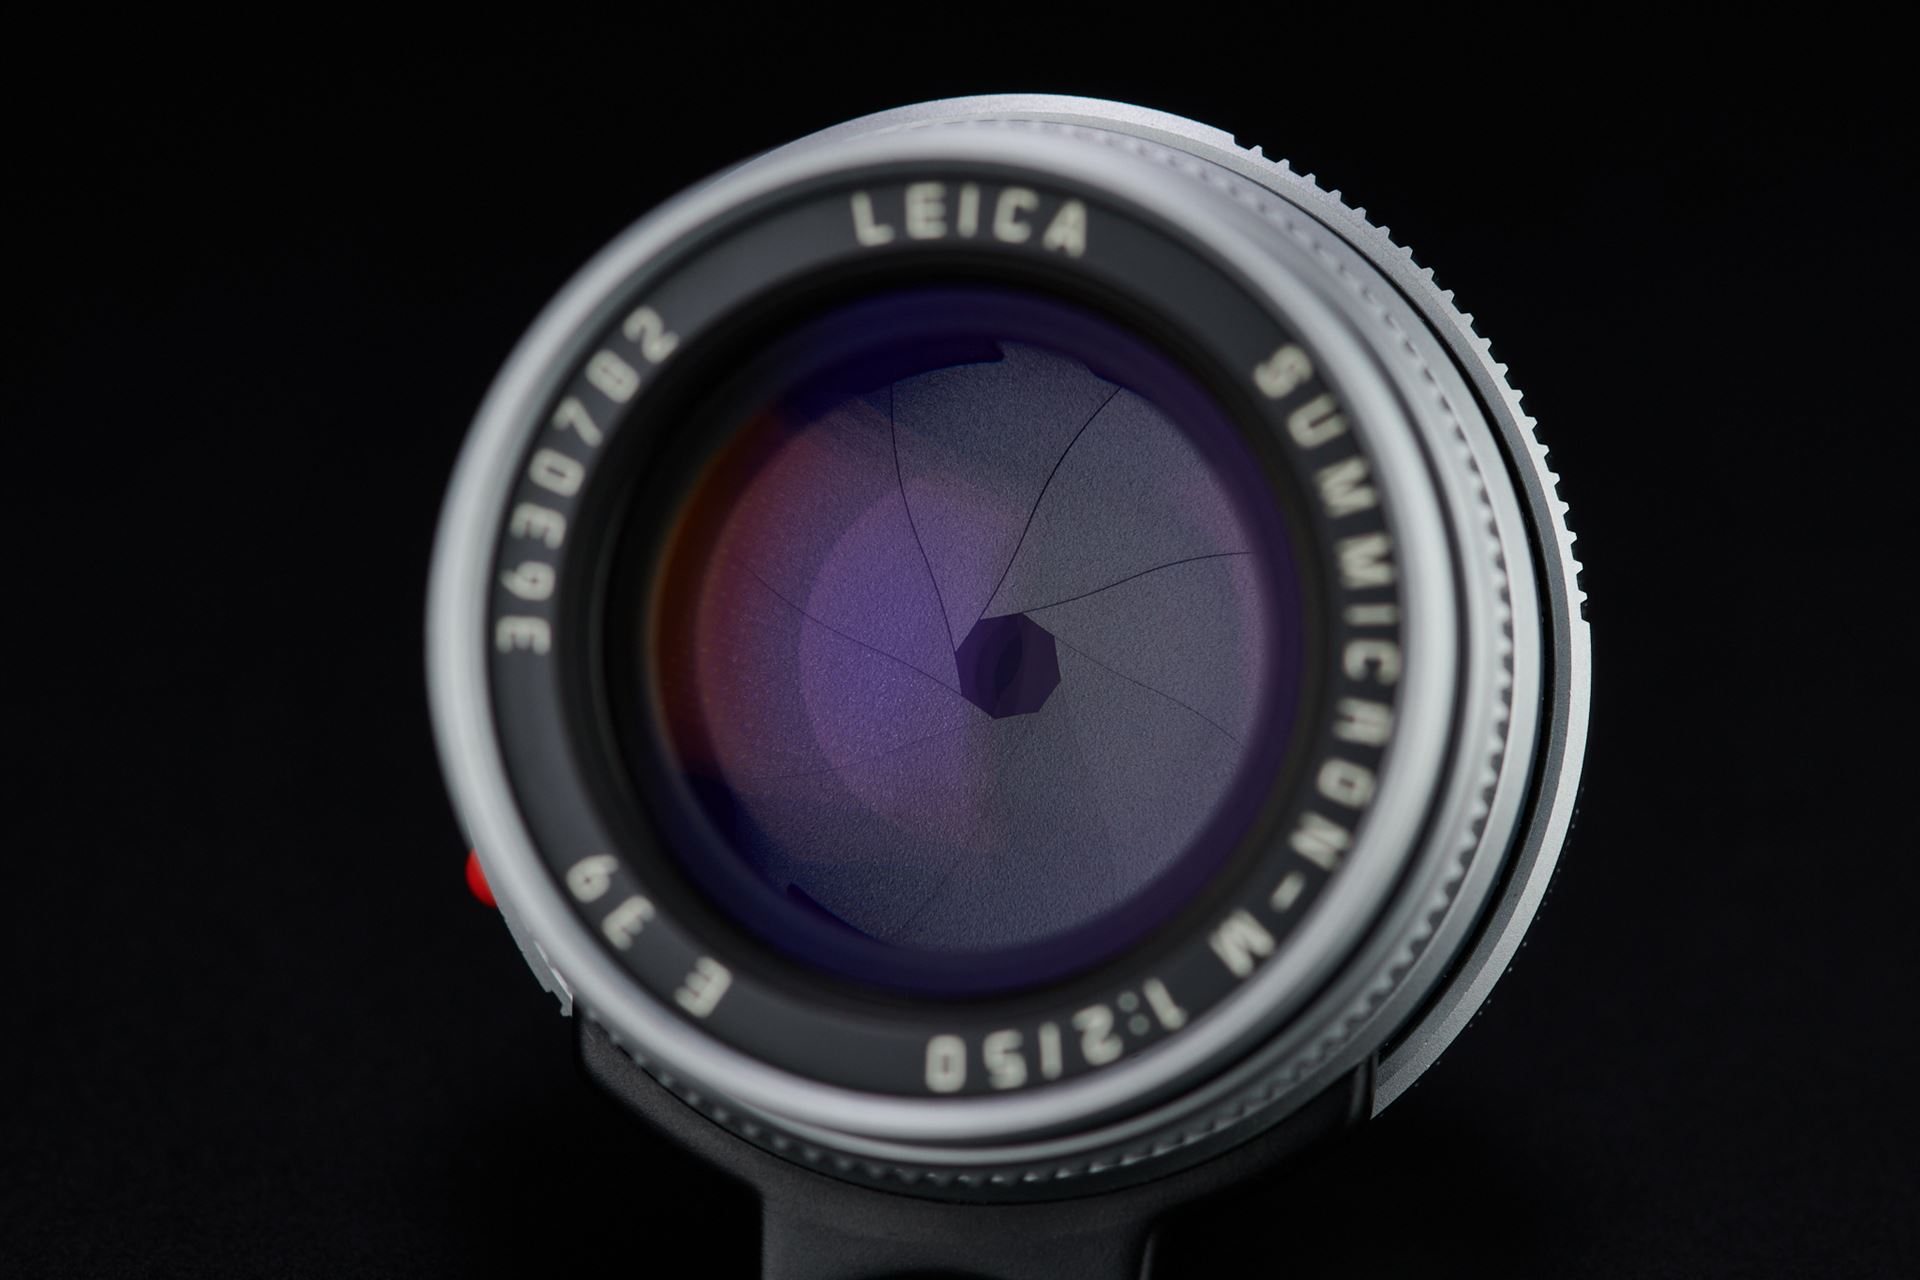 Picture of leica summicron-m 50mm f/2 Ver.4 silver